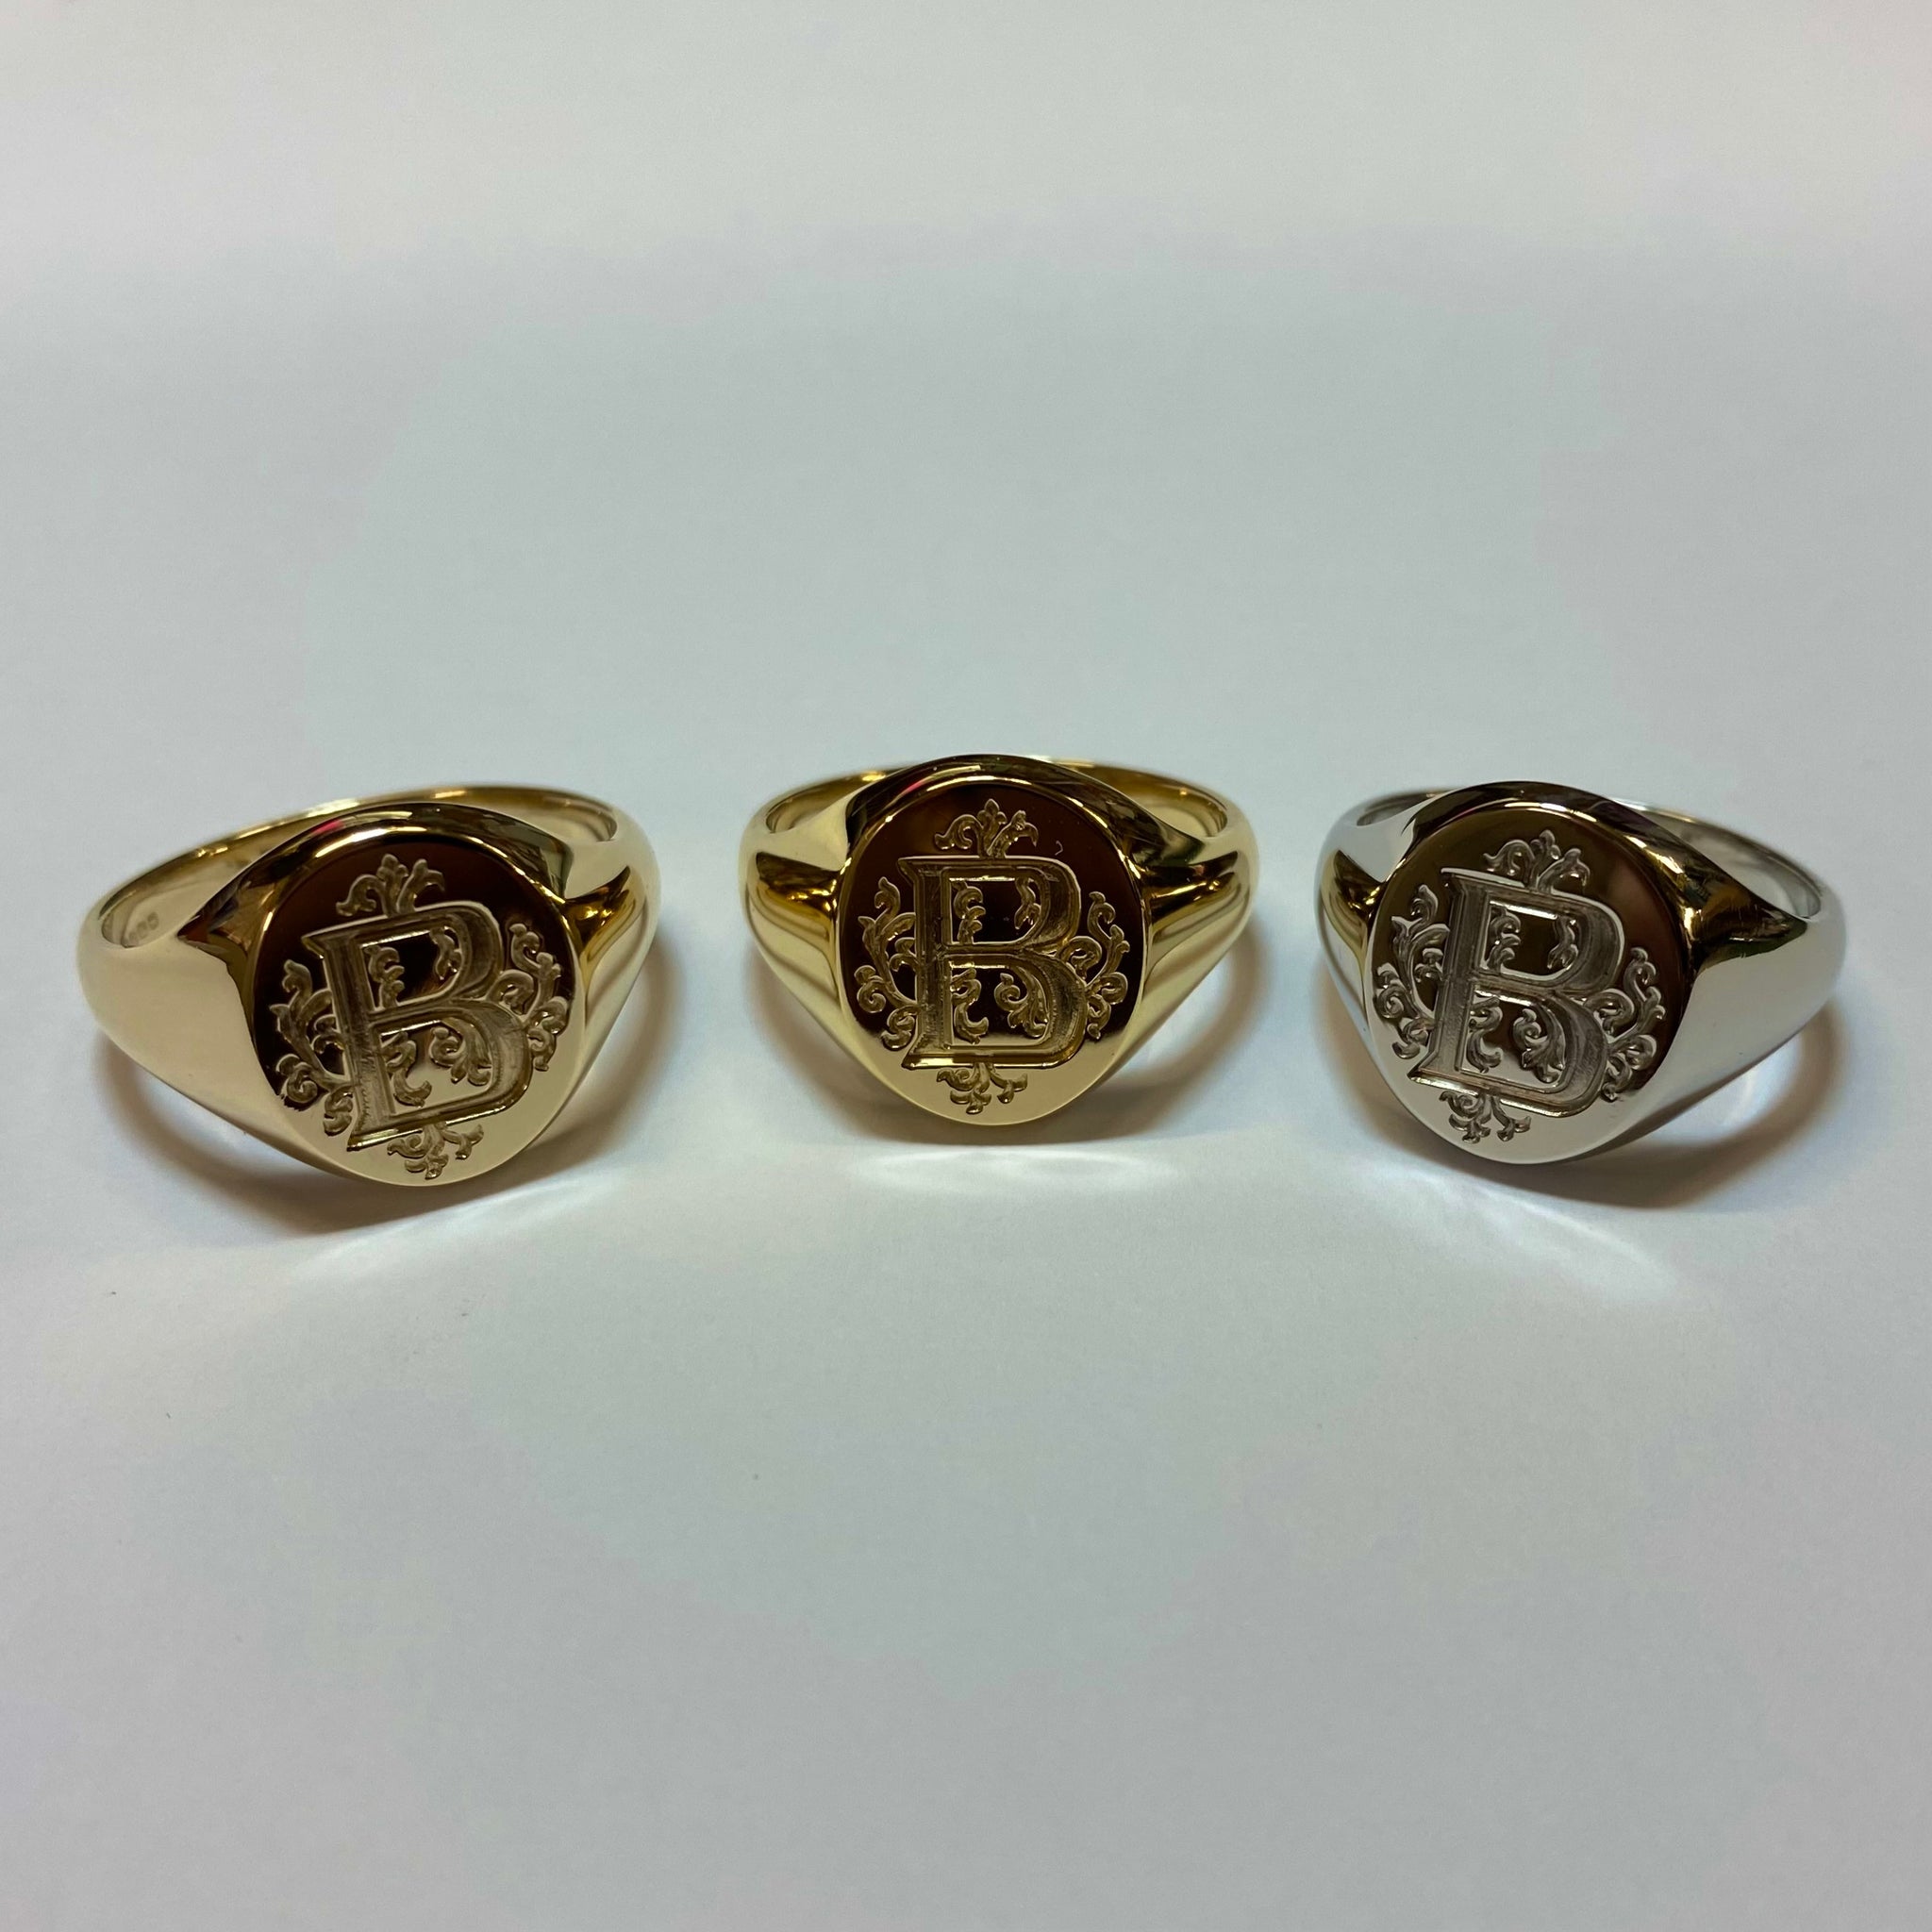 Reasons to Buy an Anthony Paul Signet Ring